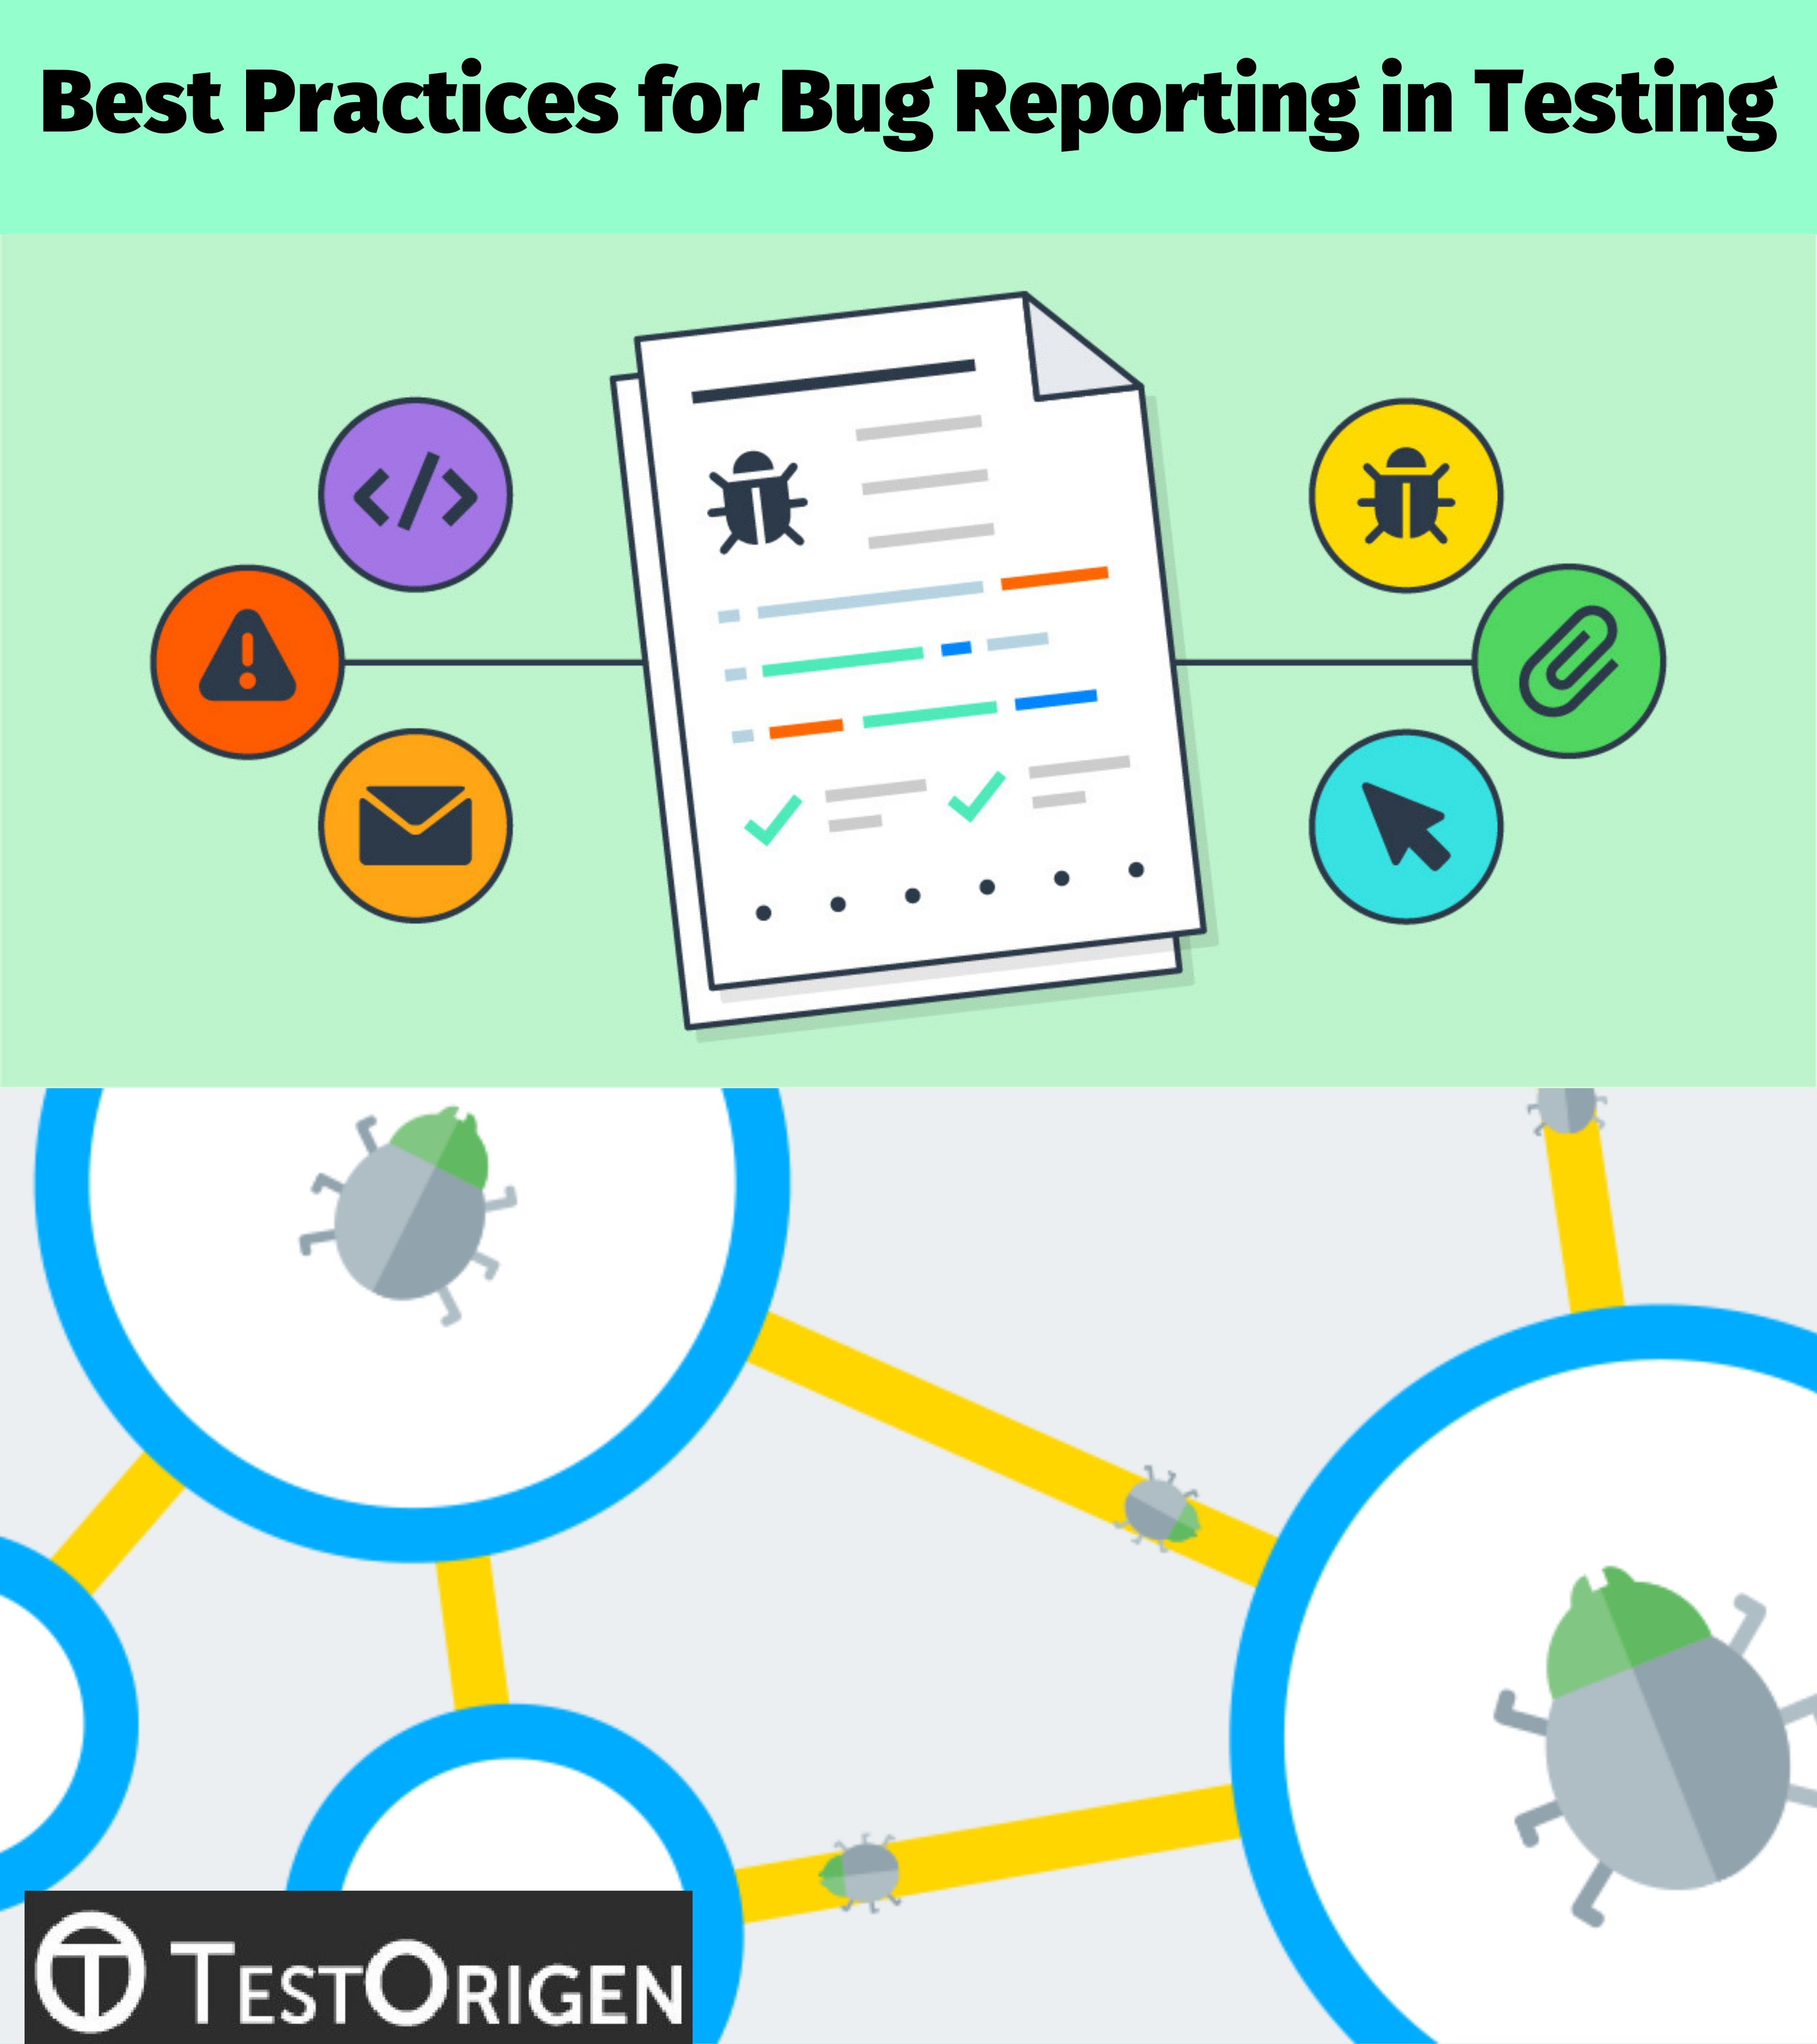 Best Practices for Bug Reporting in Testing. Bug reporting